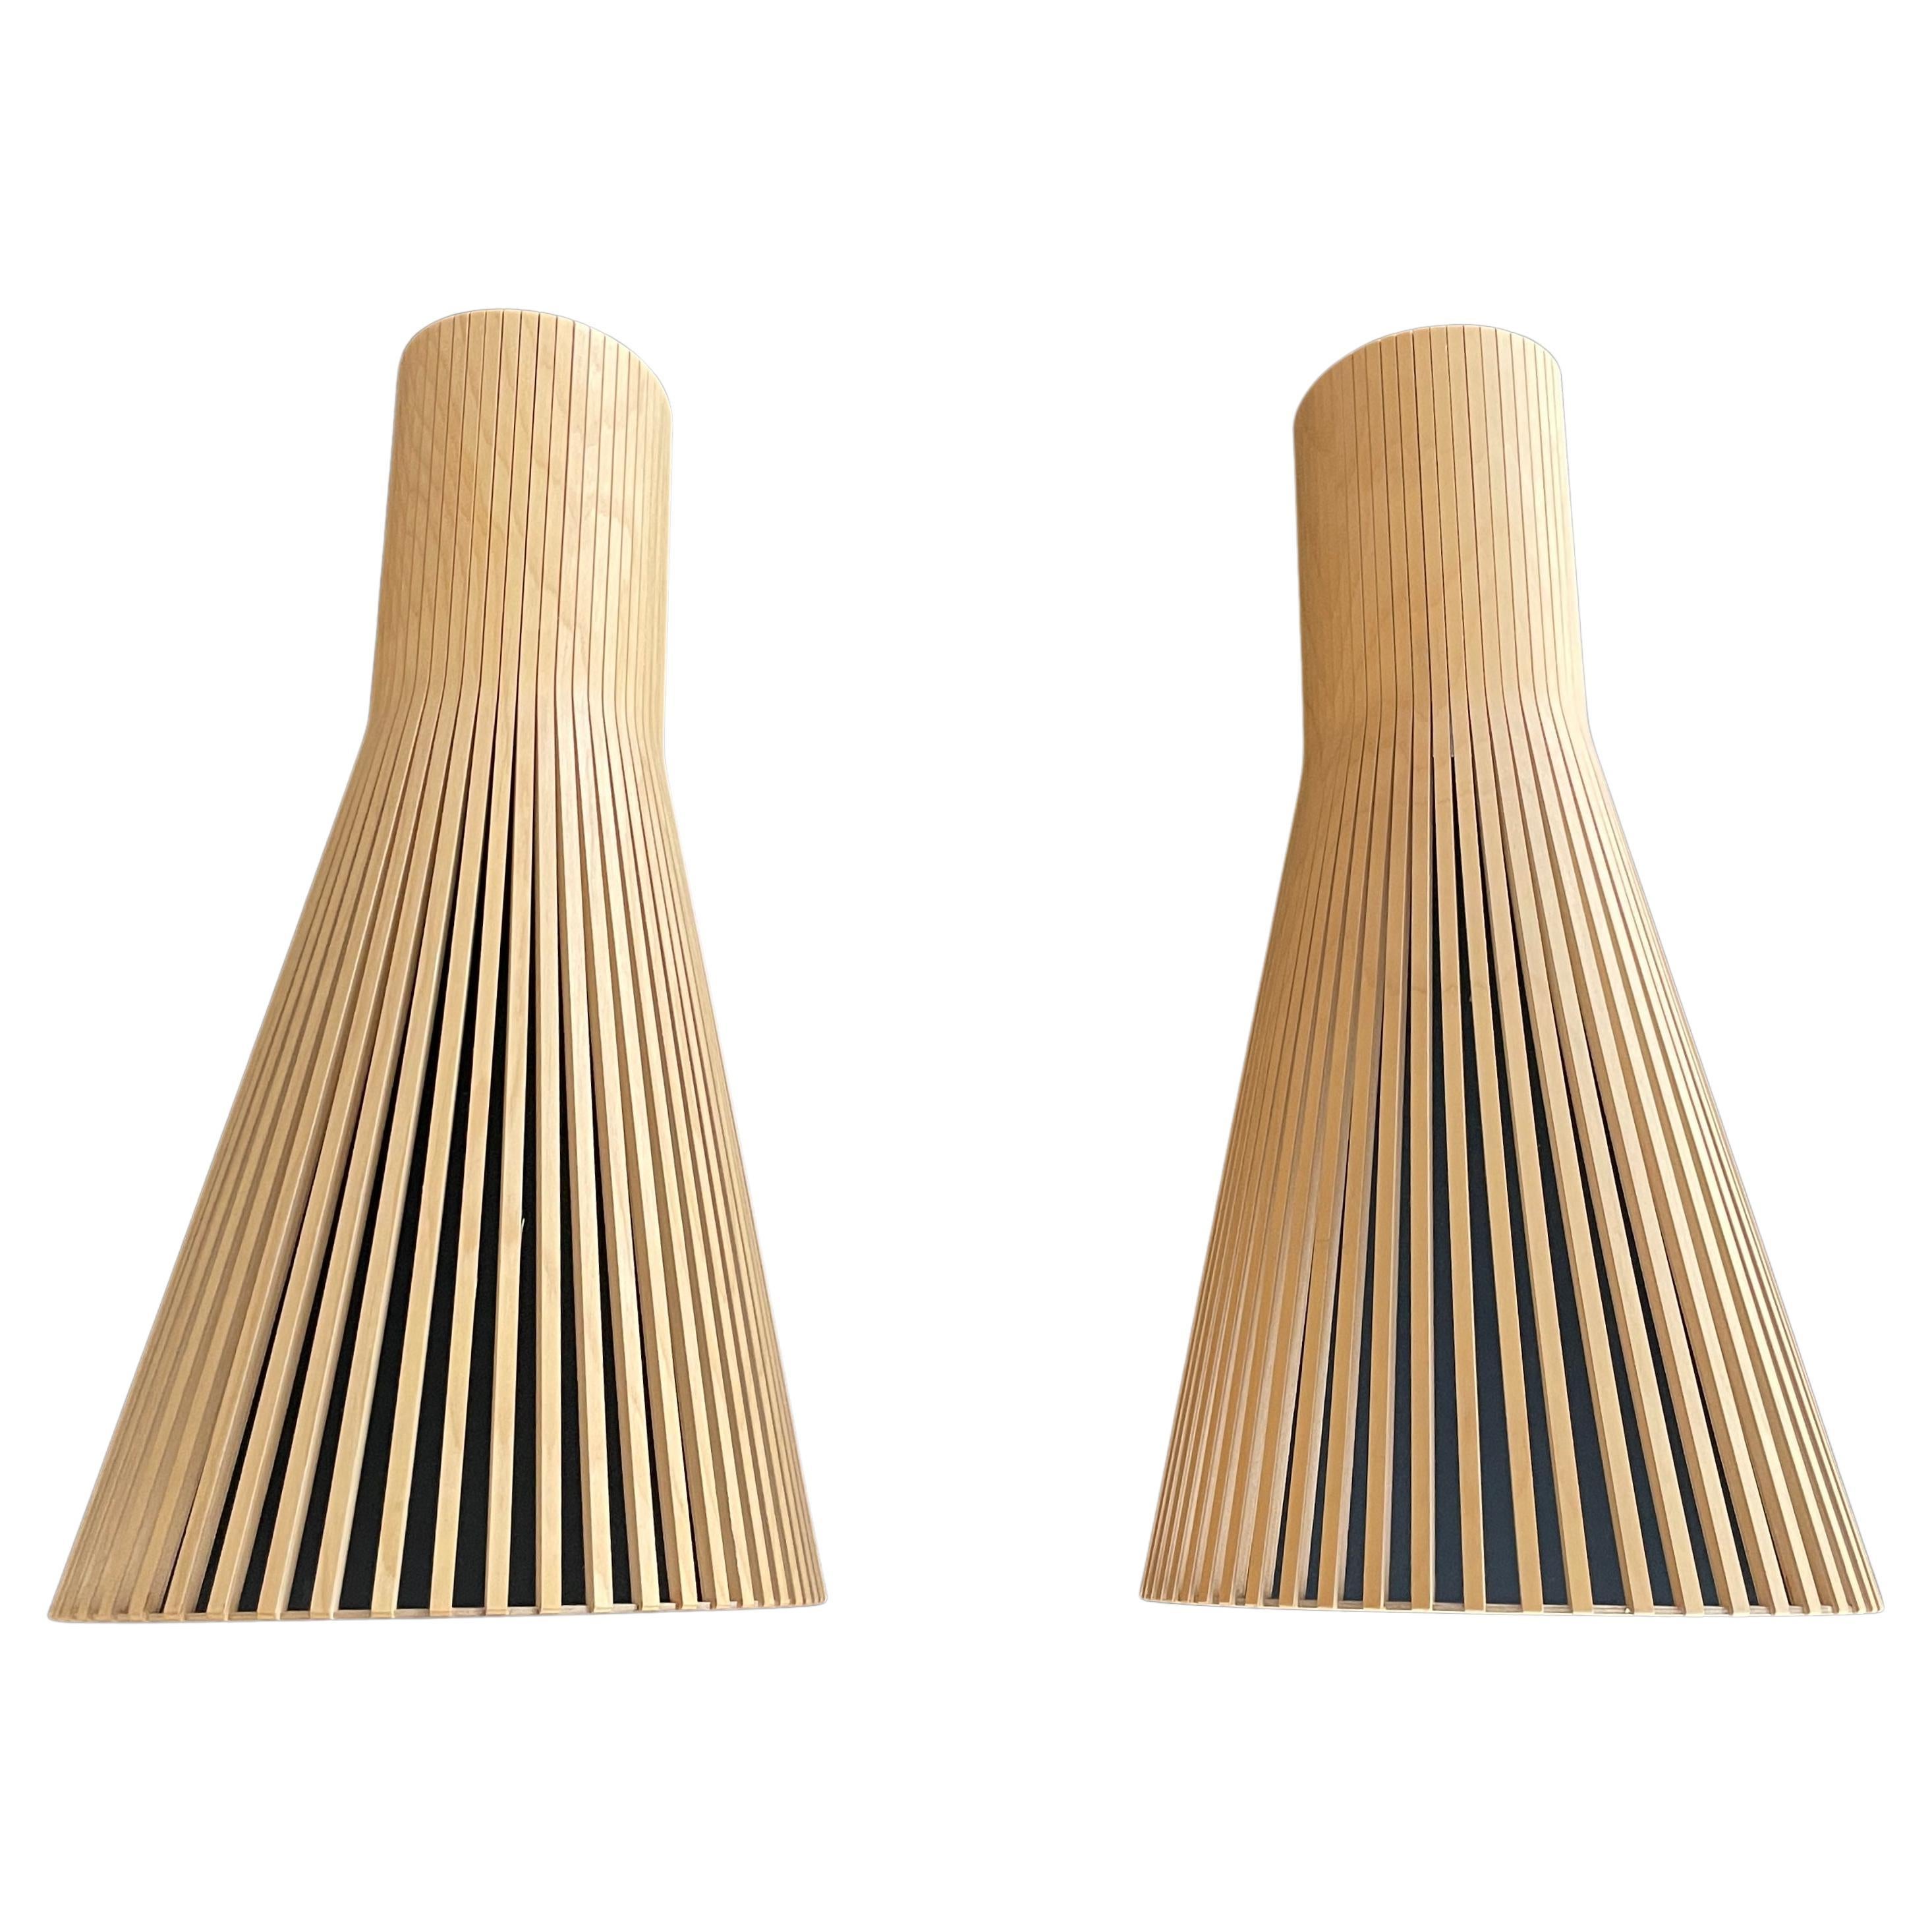 Pair of Wooden Secto 4230 Wall Lamps by Secto Design Finland